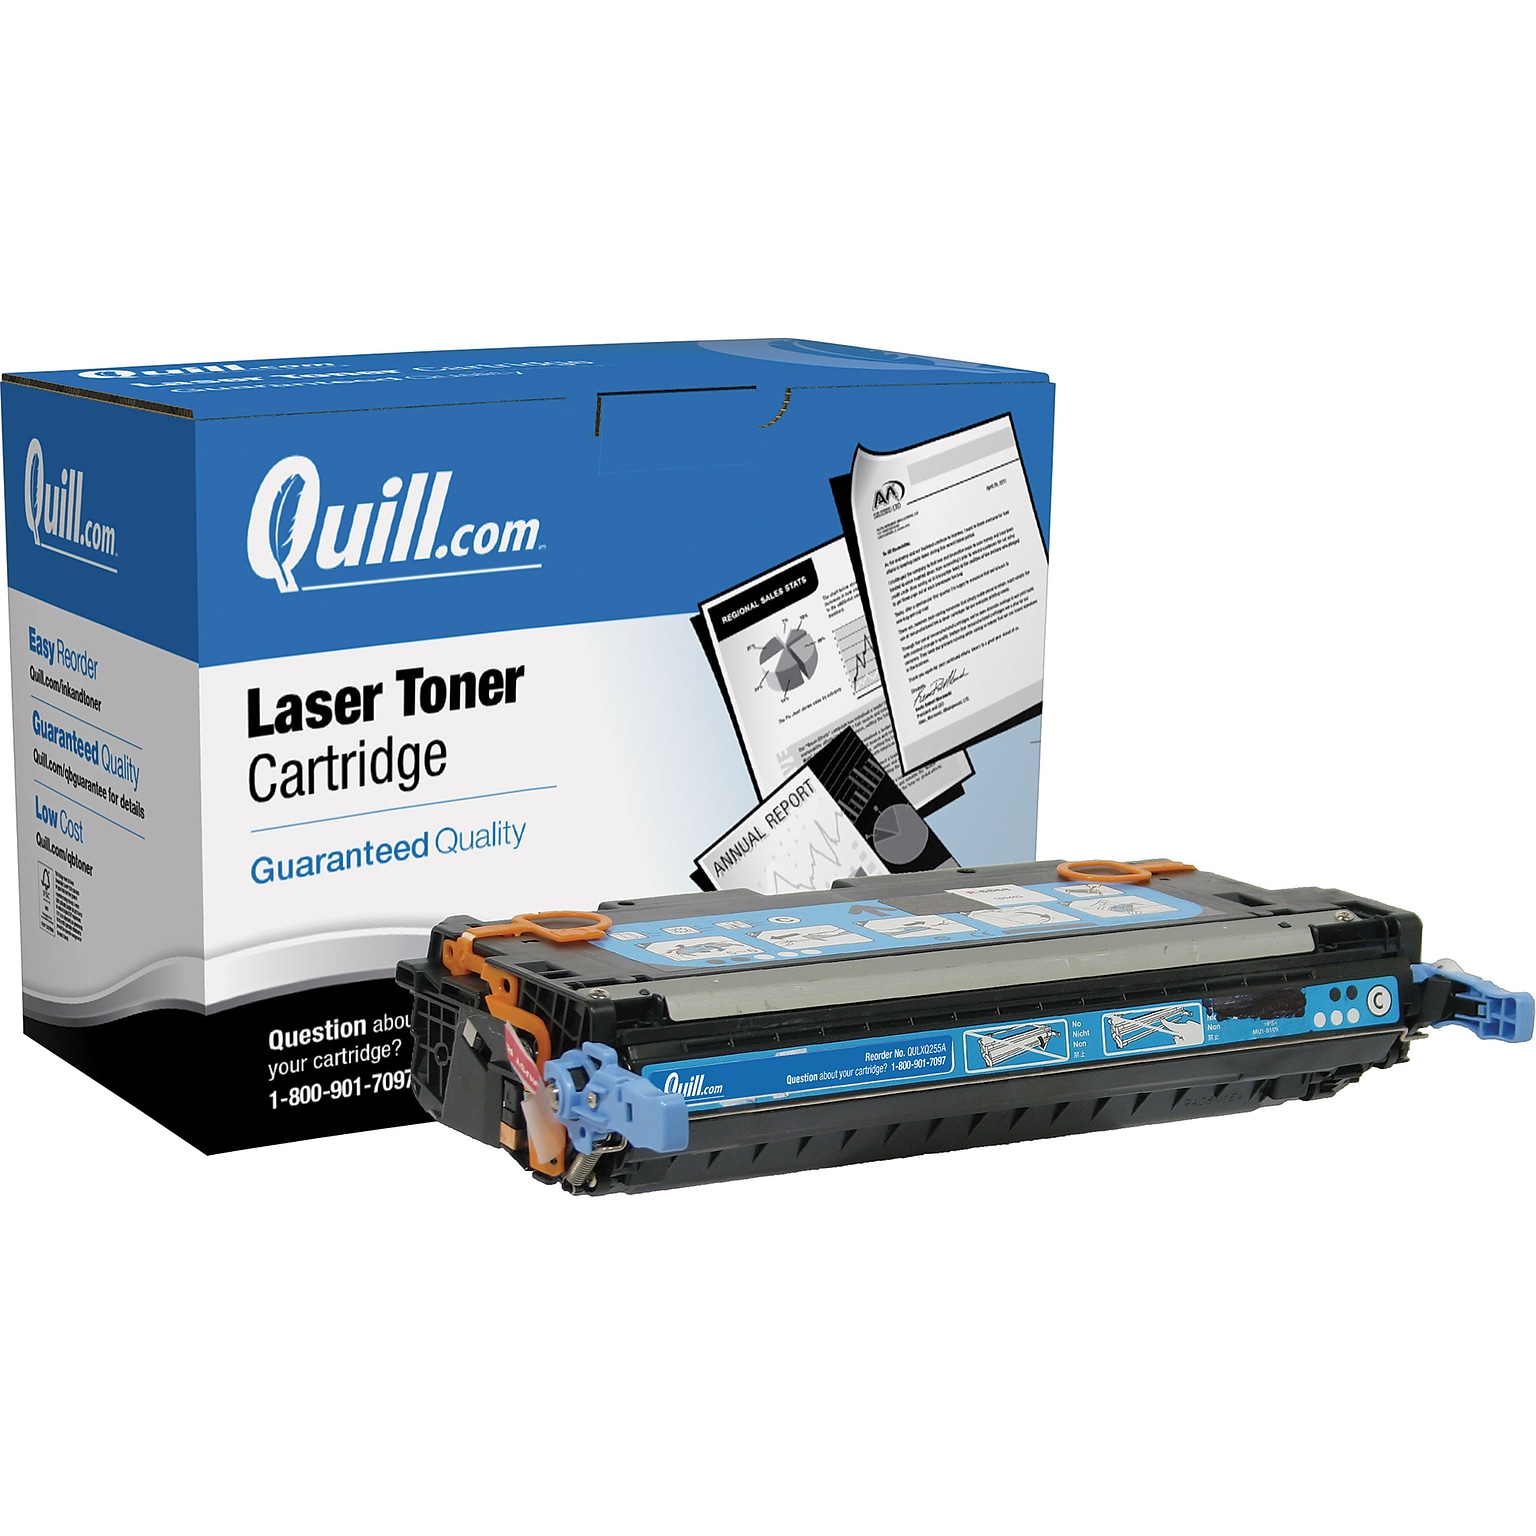 Quill Brand Remanufactured HP 502A (Q6471A) Cyan Laser Toner Cartridge (100% Satisfaction Guaranteed)